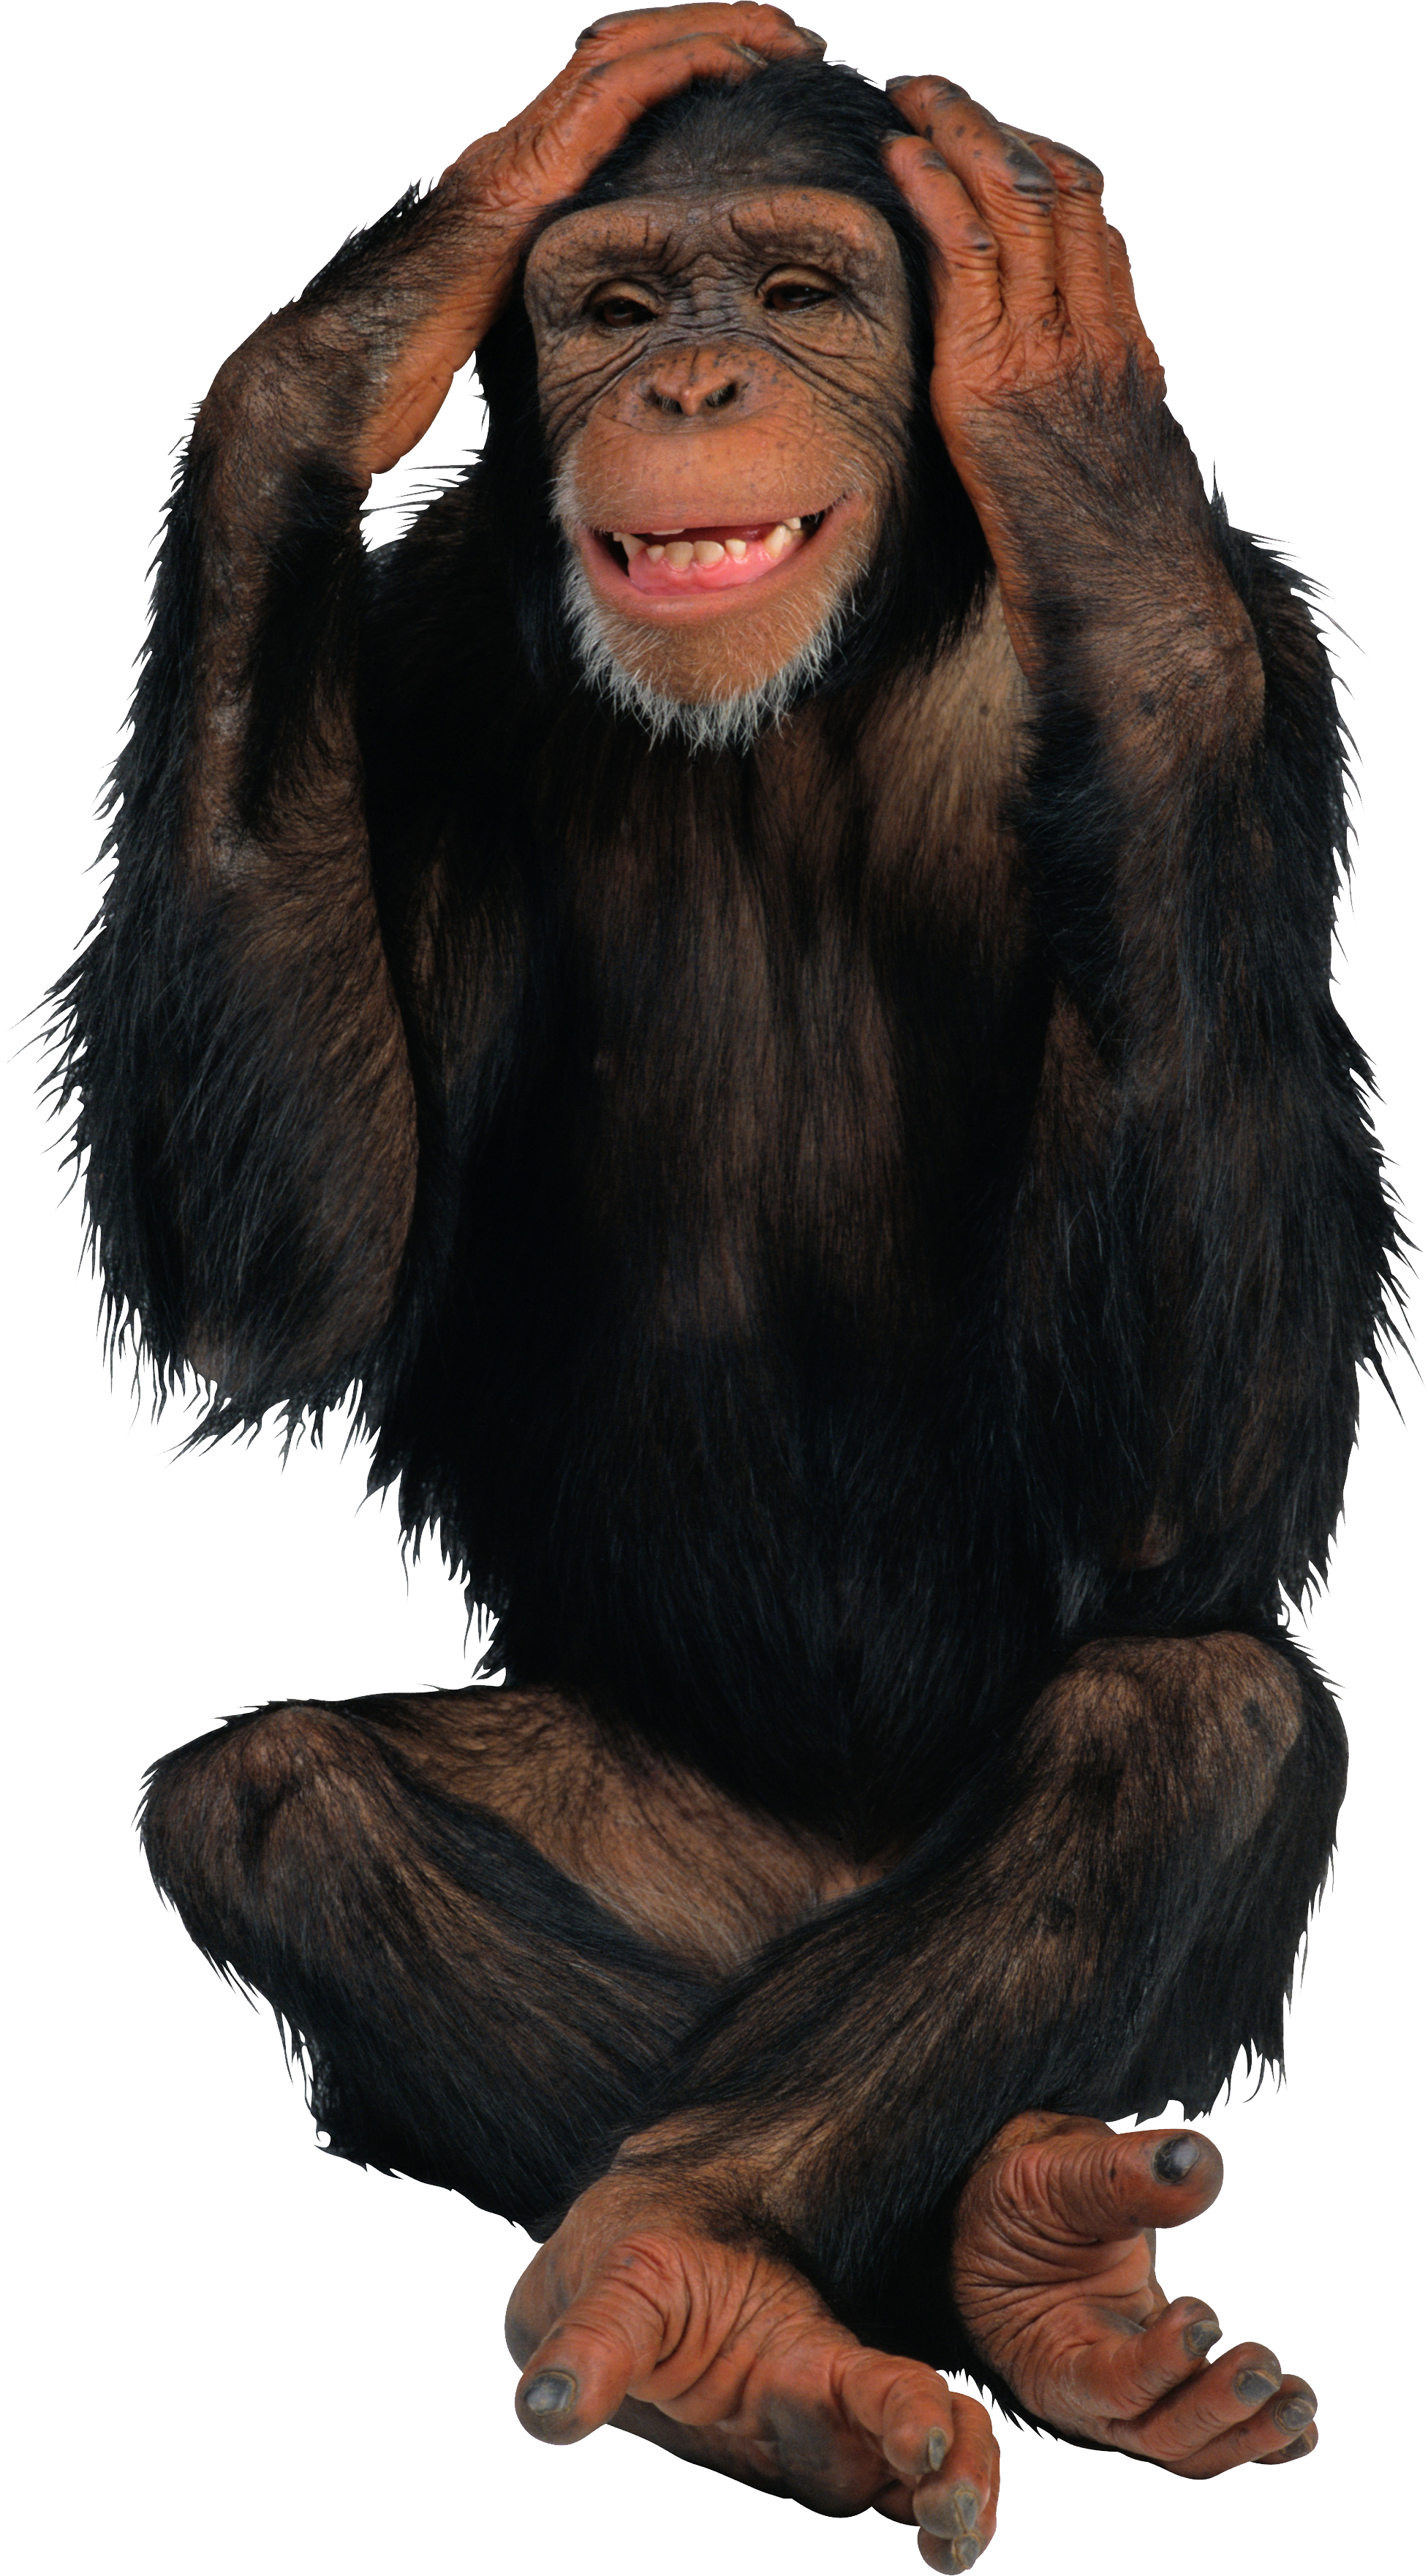 Monkey PNG images